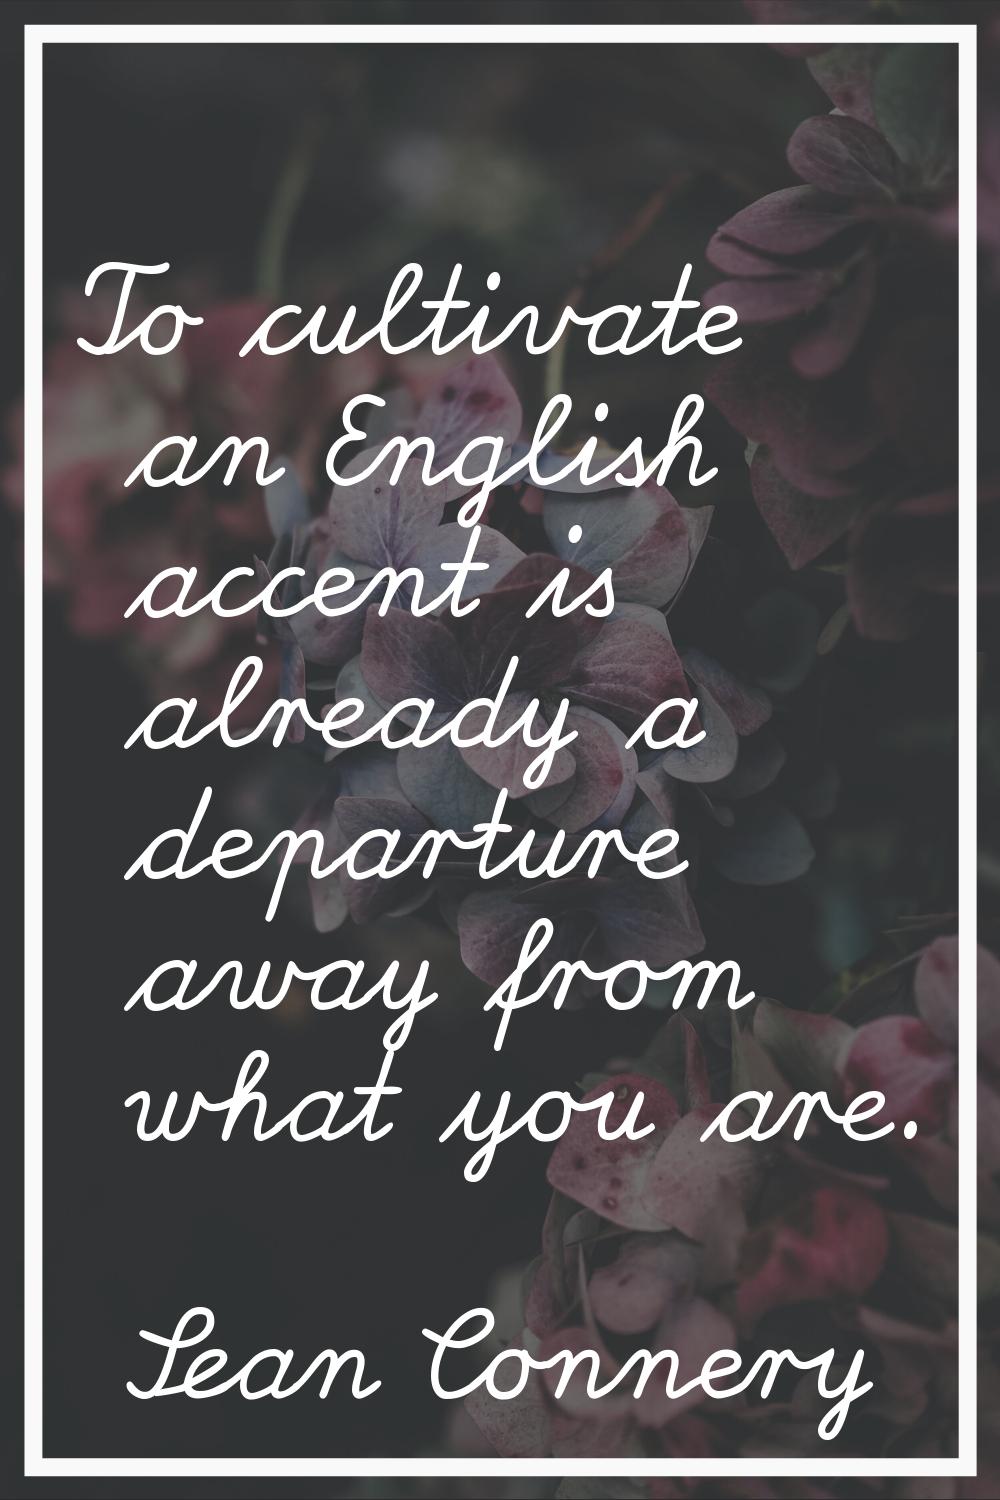 To cultivate an English accent is already a departure away from what you are.